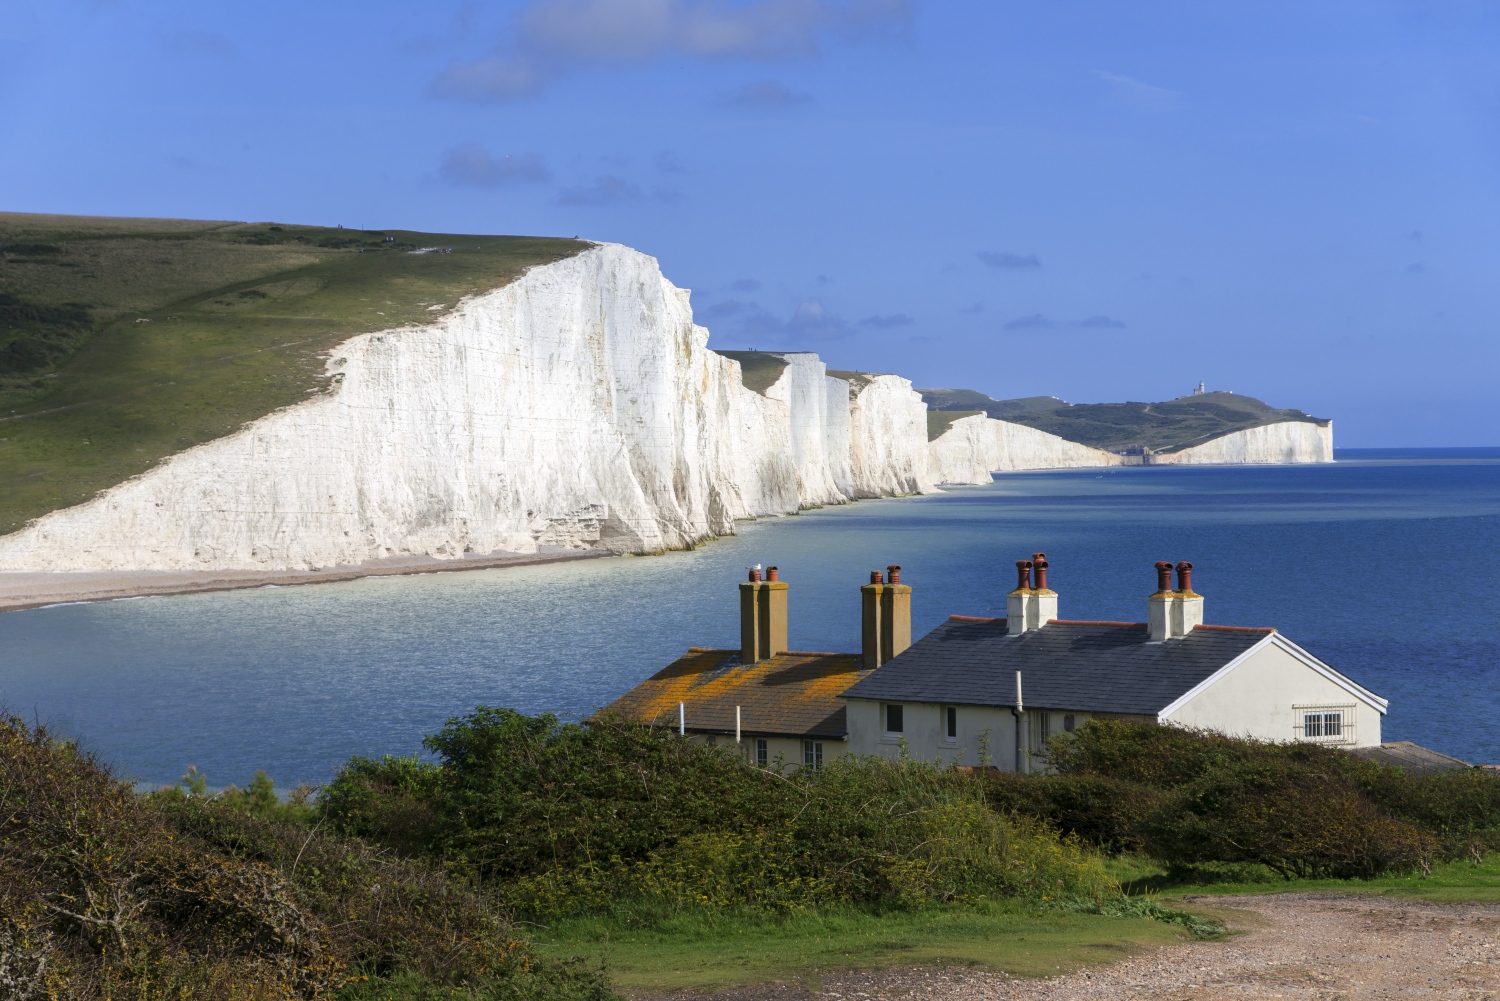 House looks over view of white cliffs next to blue ocean - South Downs Way, Sussex